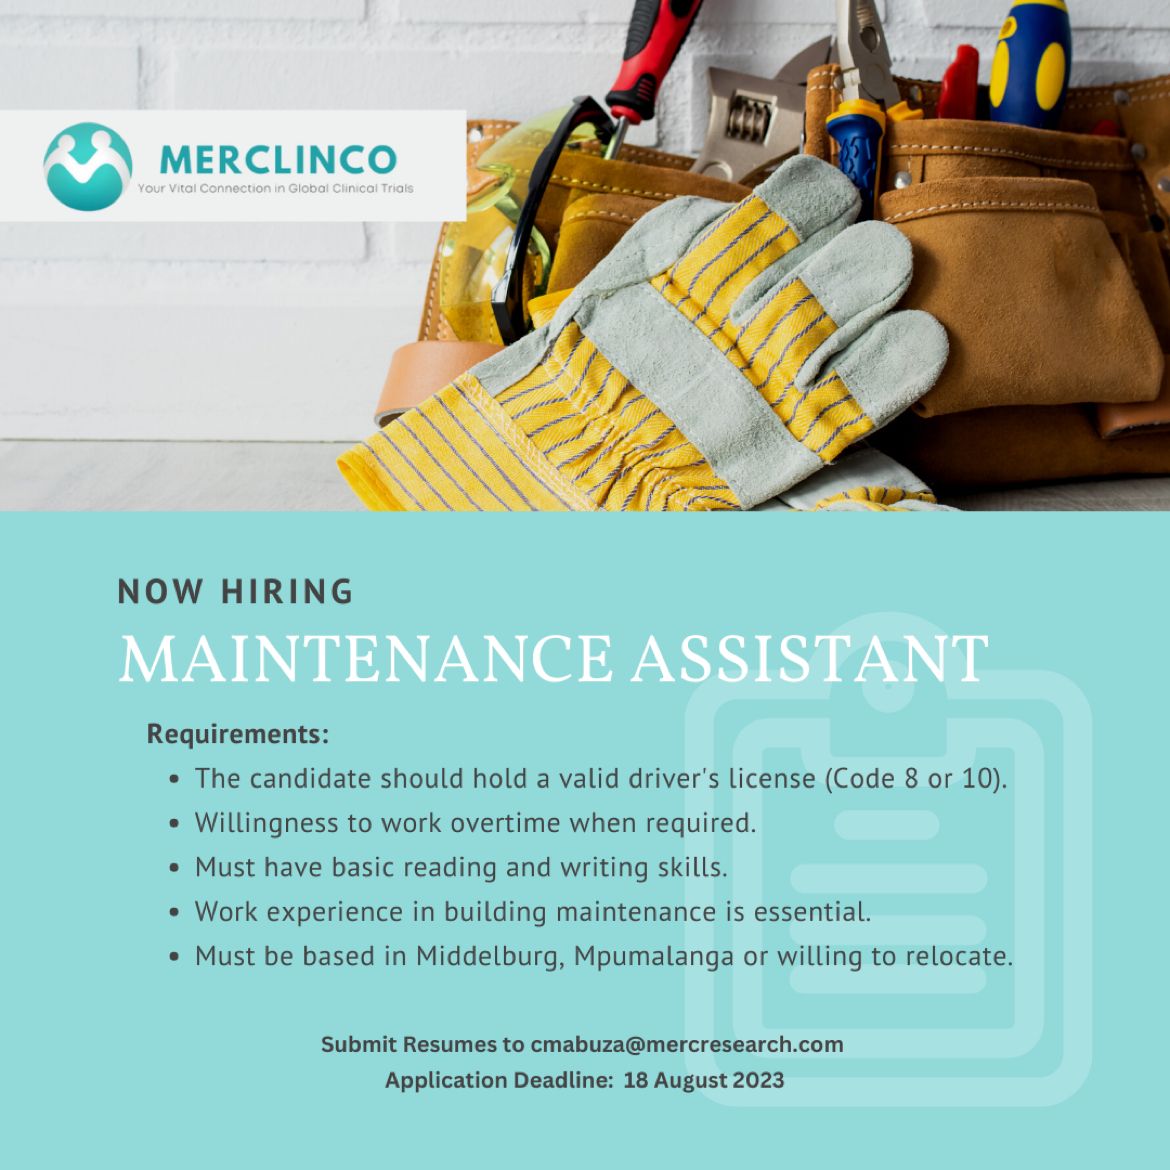 WE ARE HIRING! We are looking for a Maintenance Assistant to join our team at MERCLINCO. If you think you might be a good fit, please contact or submit your CV to HR at cmabuza@mercresearch.com. We look forward to hearing from you!